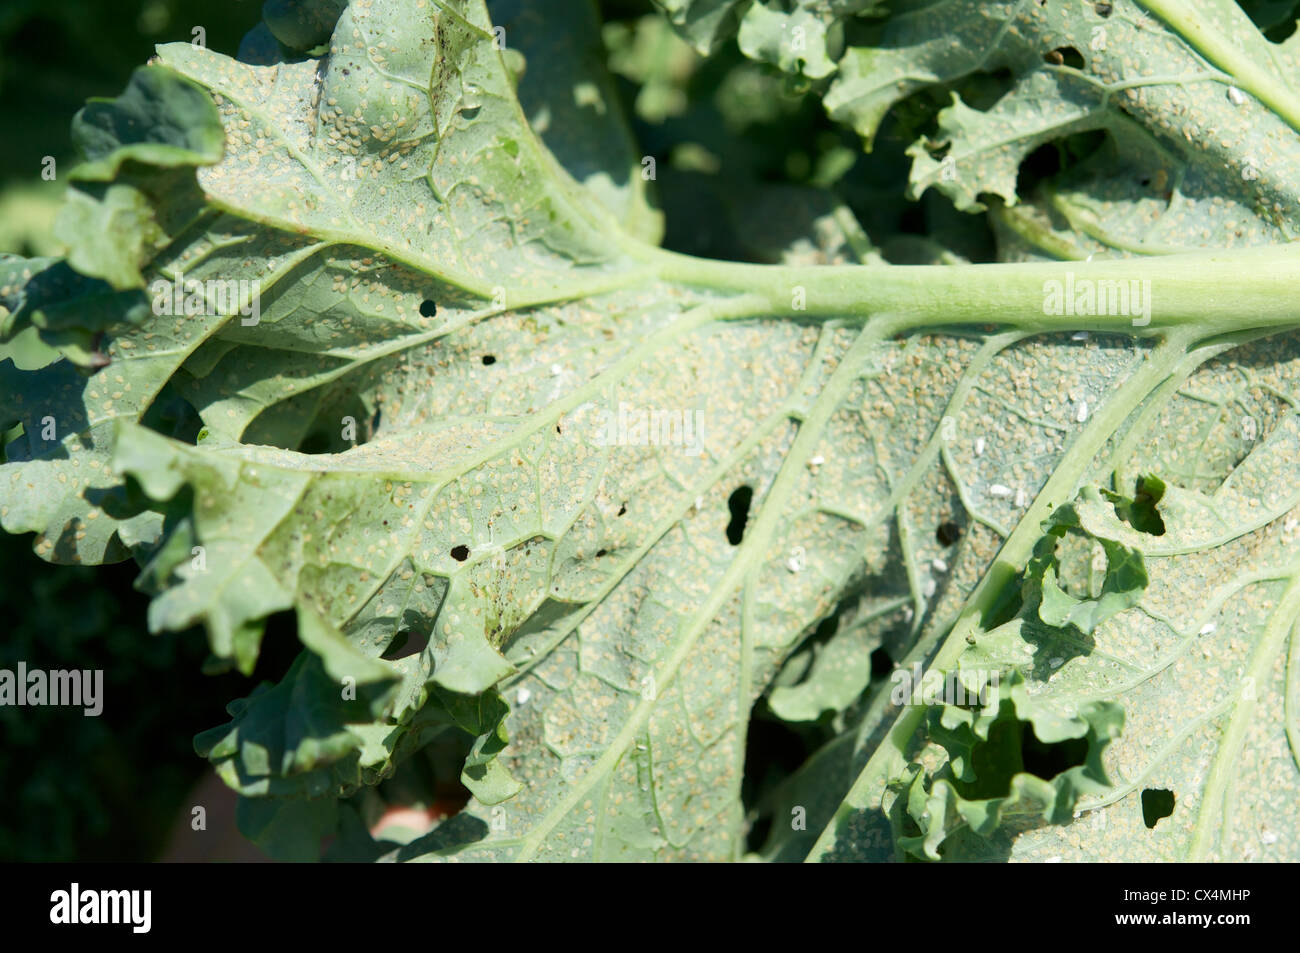 Adults and eggs of the cabbage whitefly (Aleyrodes proletella) on a kale leaf. Stock Photo